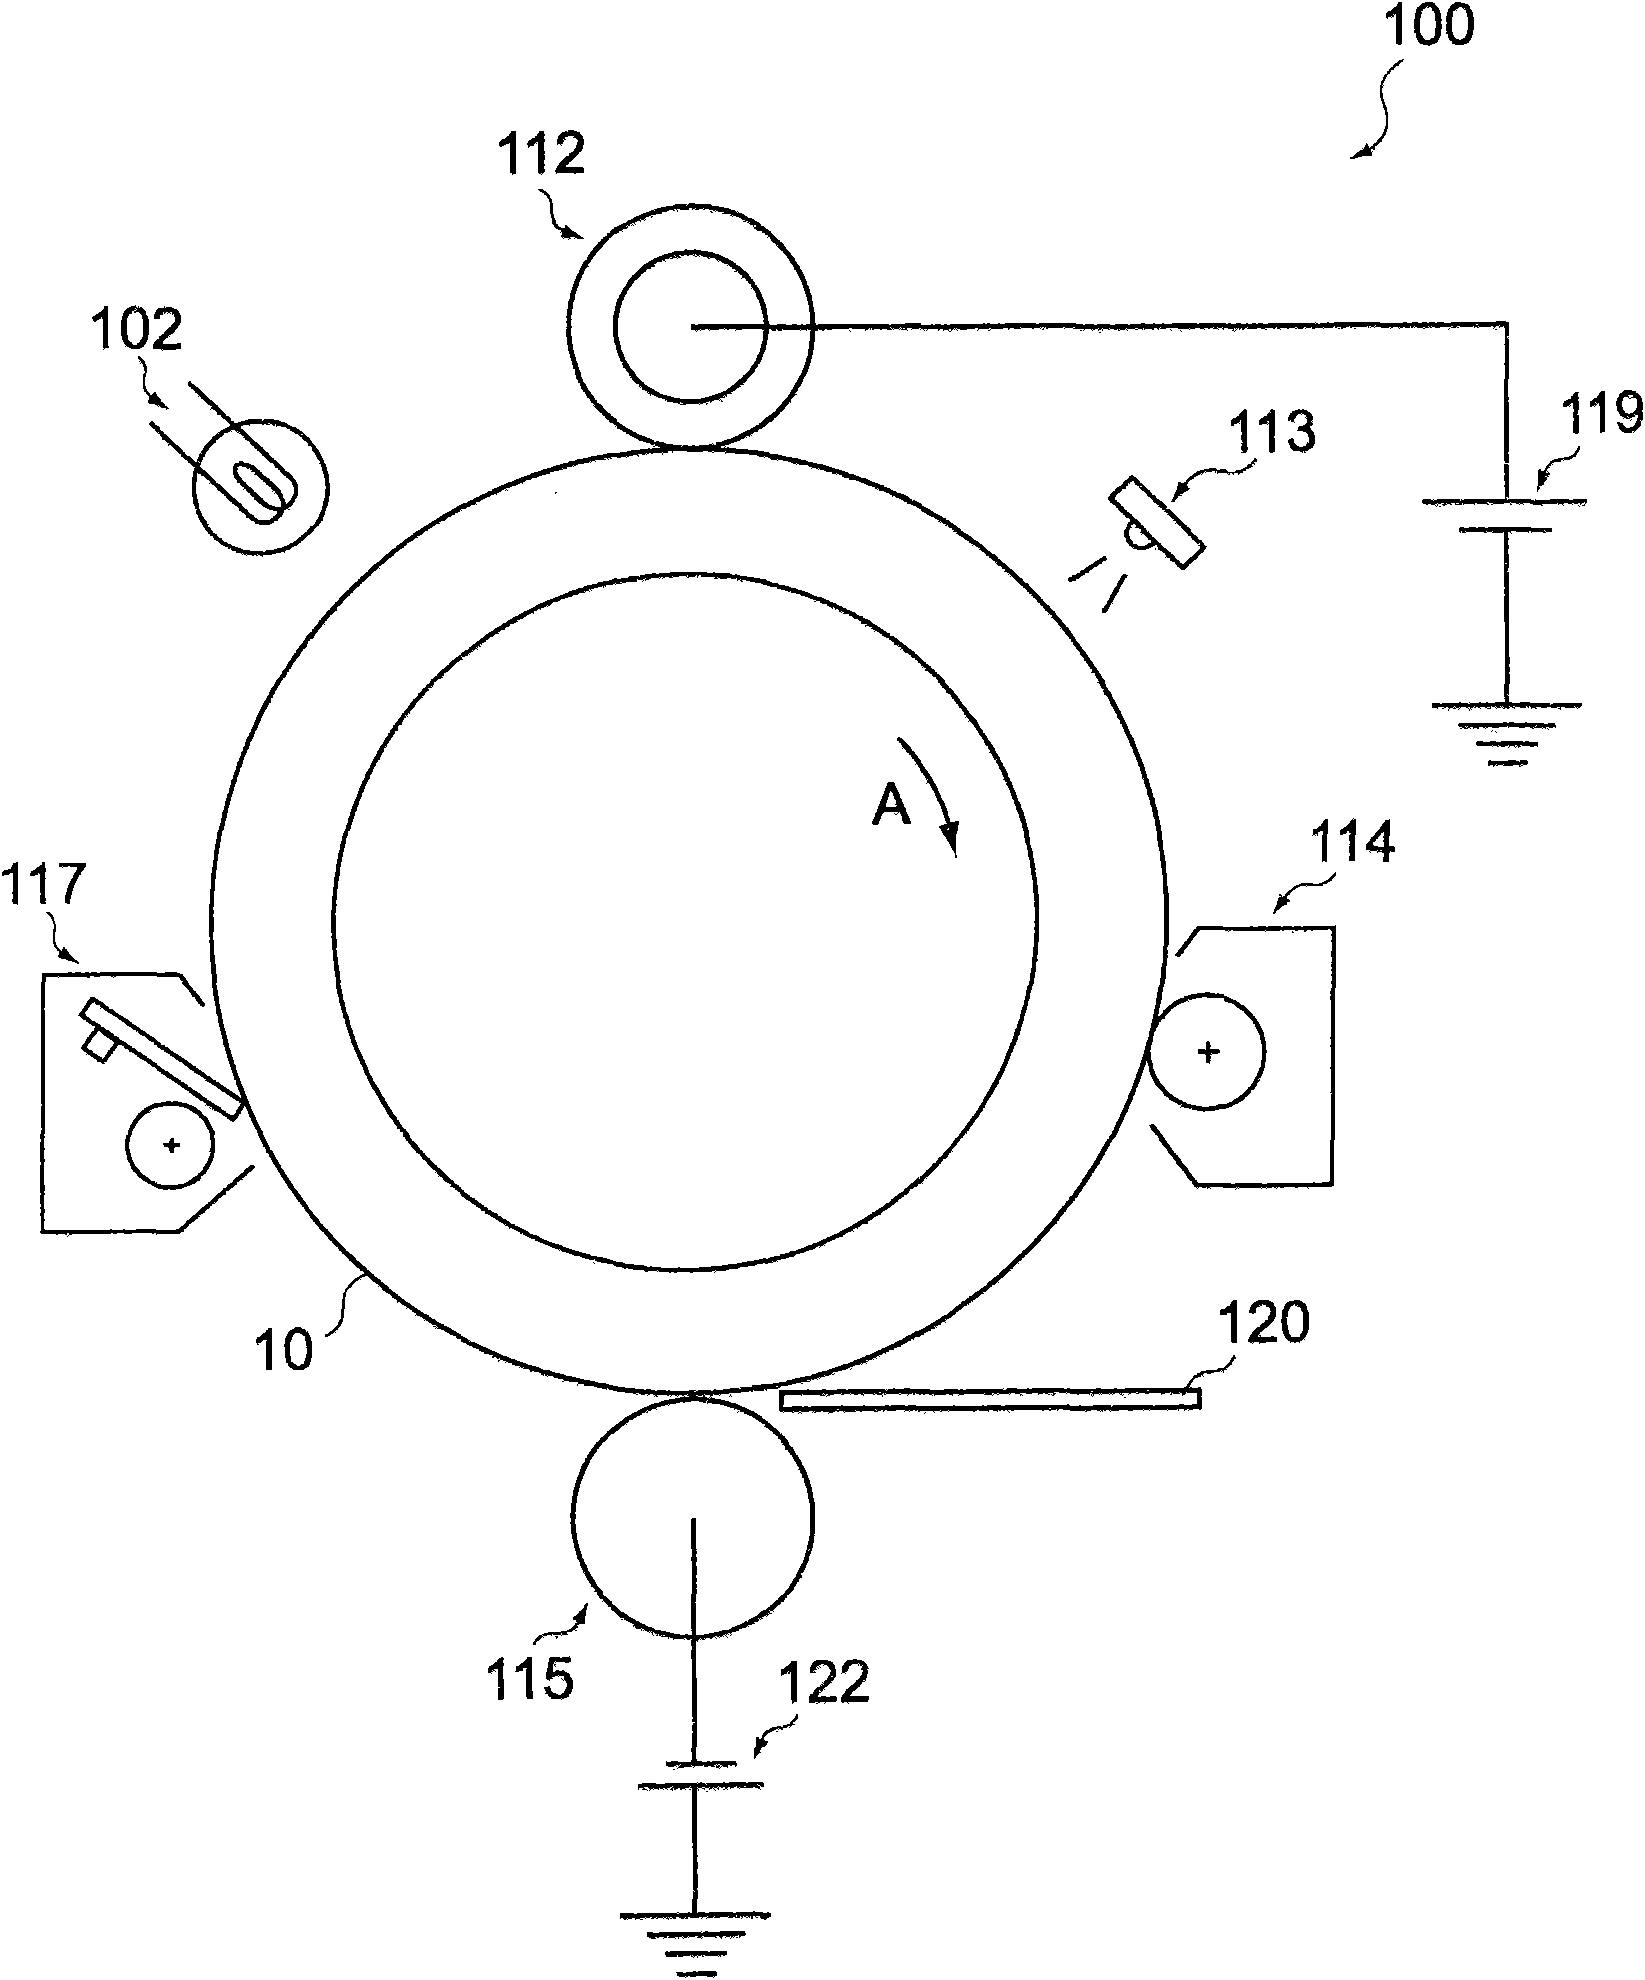 Electronic photographic photoreceptor and image forming device